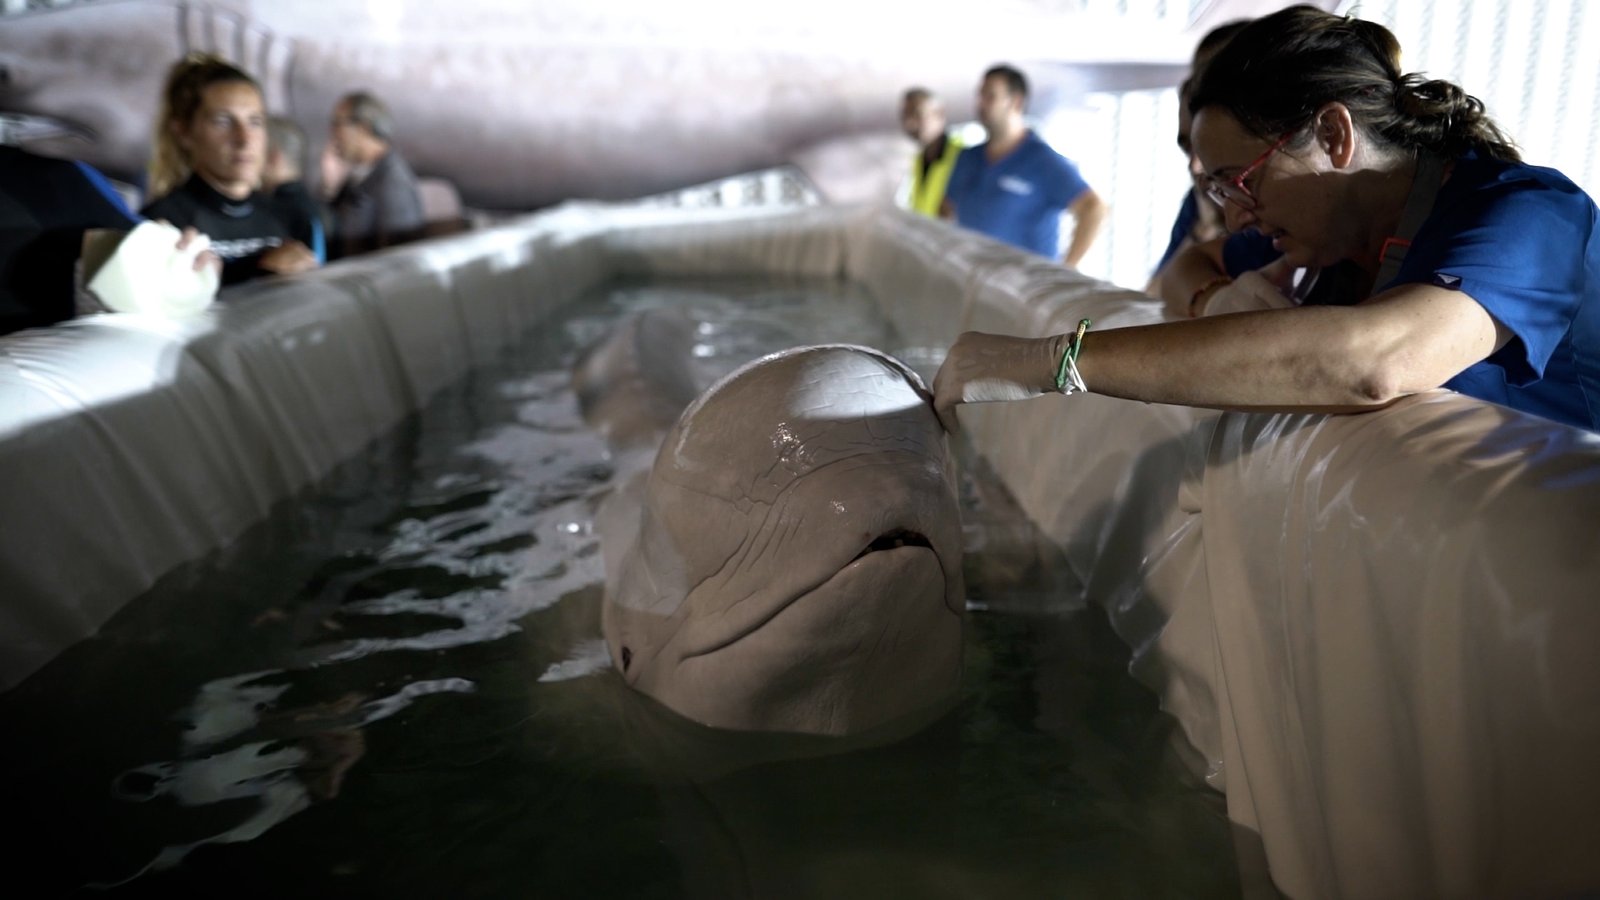 Beluga whales rescued in high risk operation | Conflict